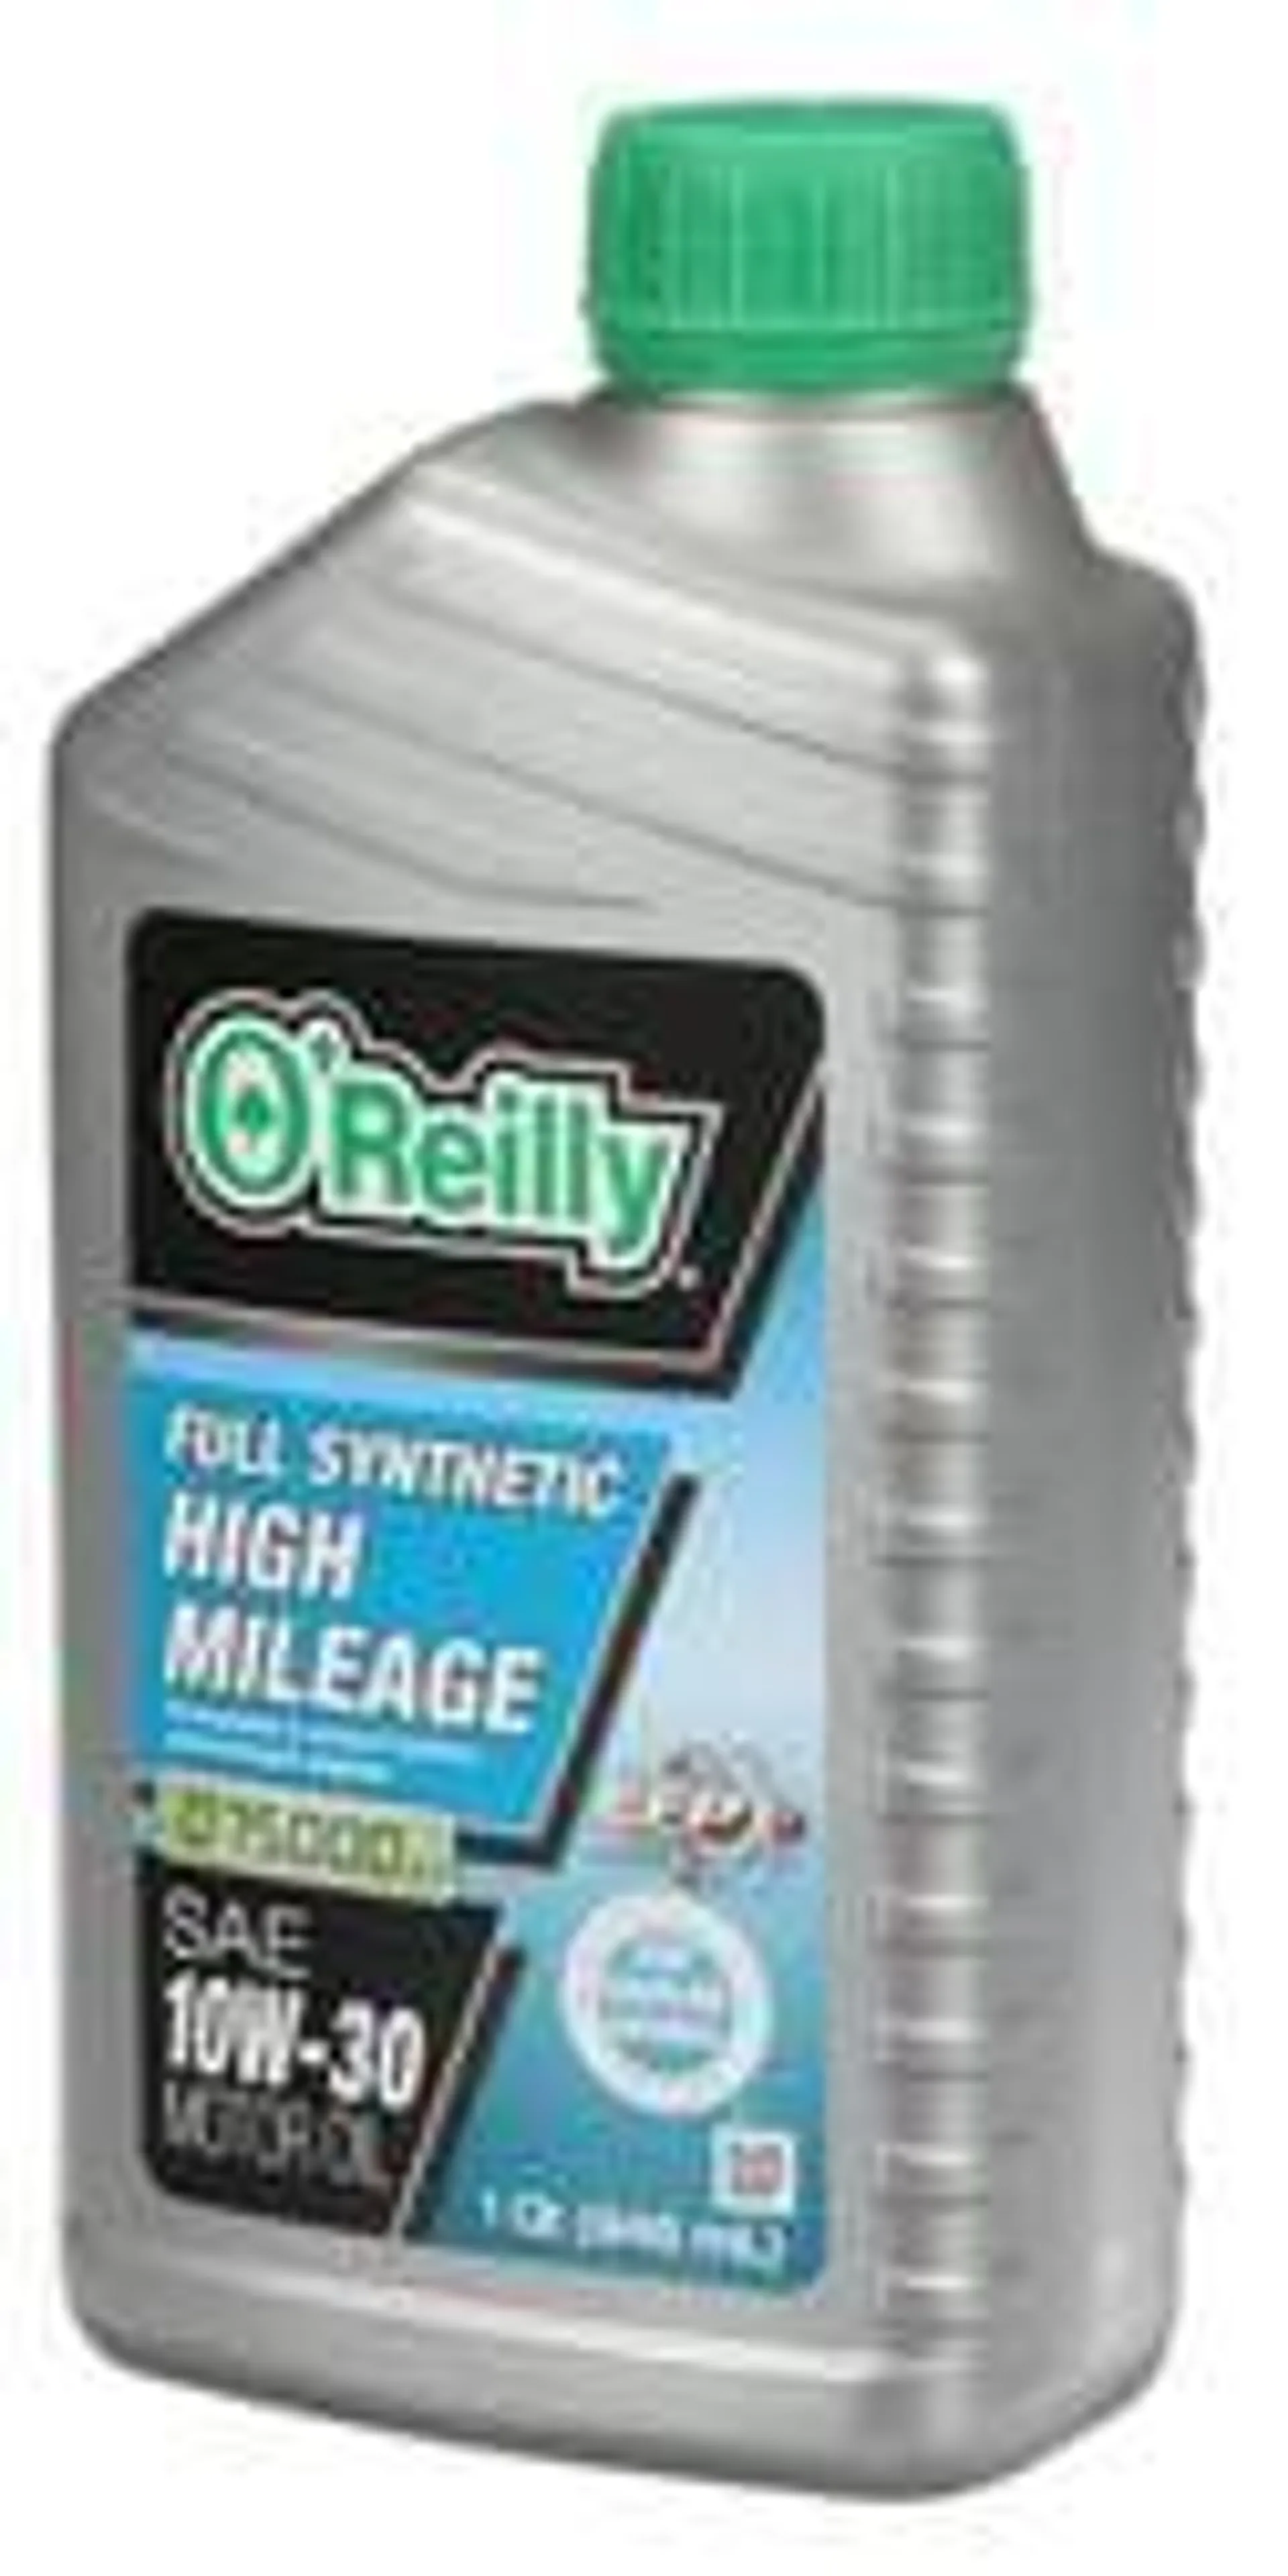 O'Reilly Full Synthetic Full Synthetic High Mileage Motor Oil 10W-30 1 Quart - HI-SYN10-30